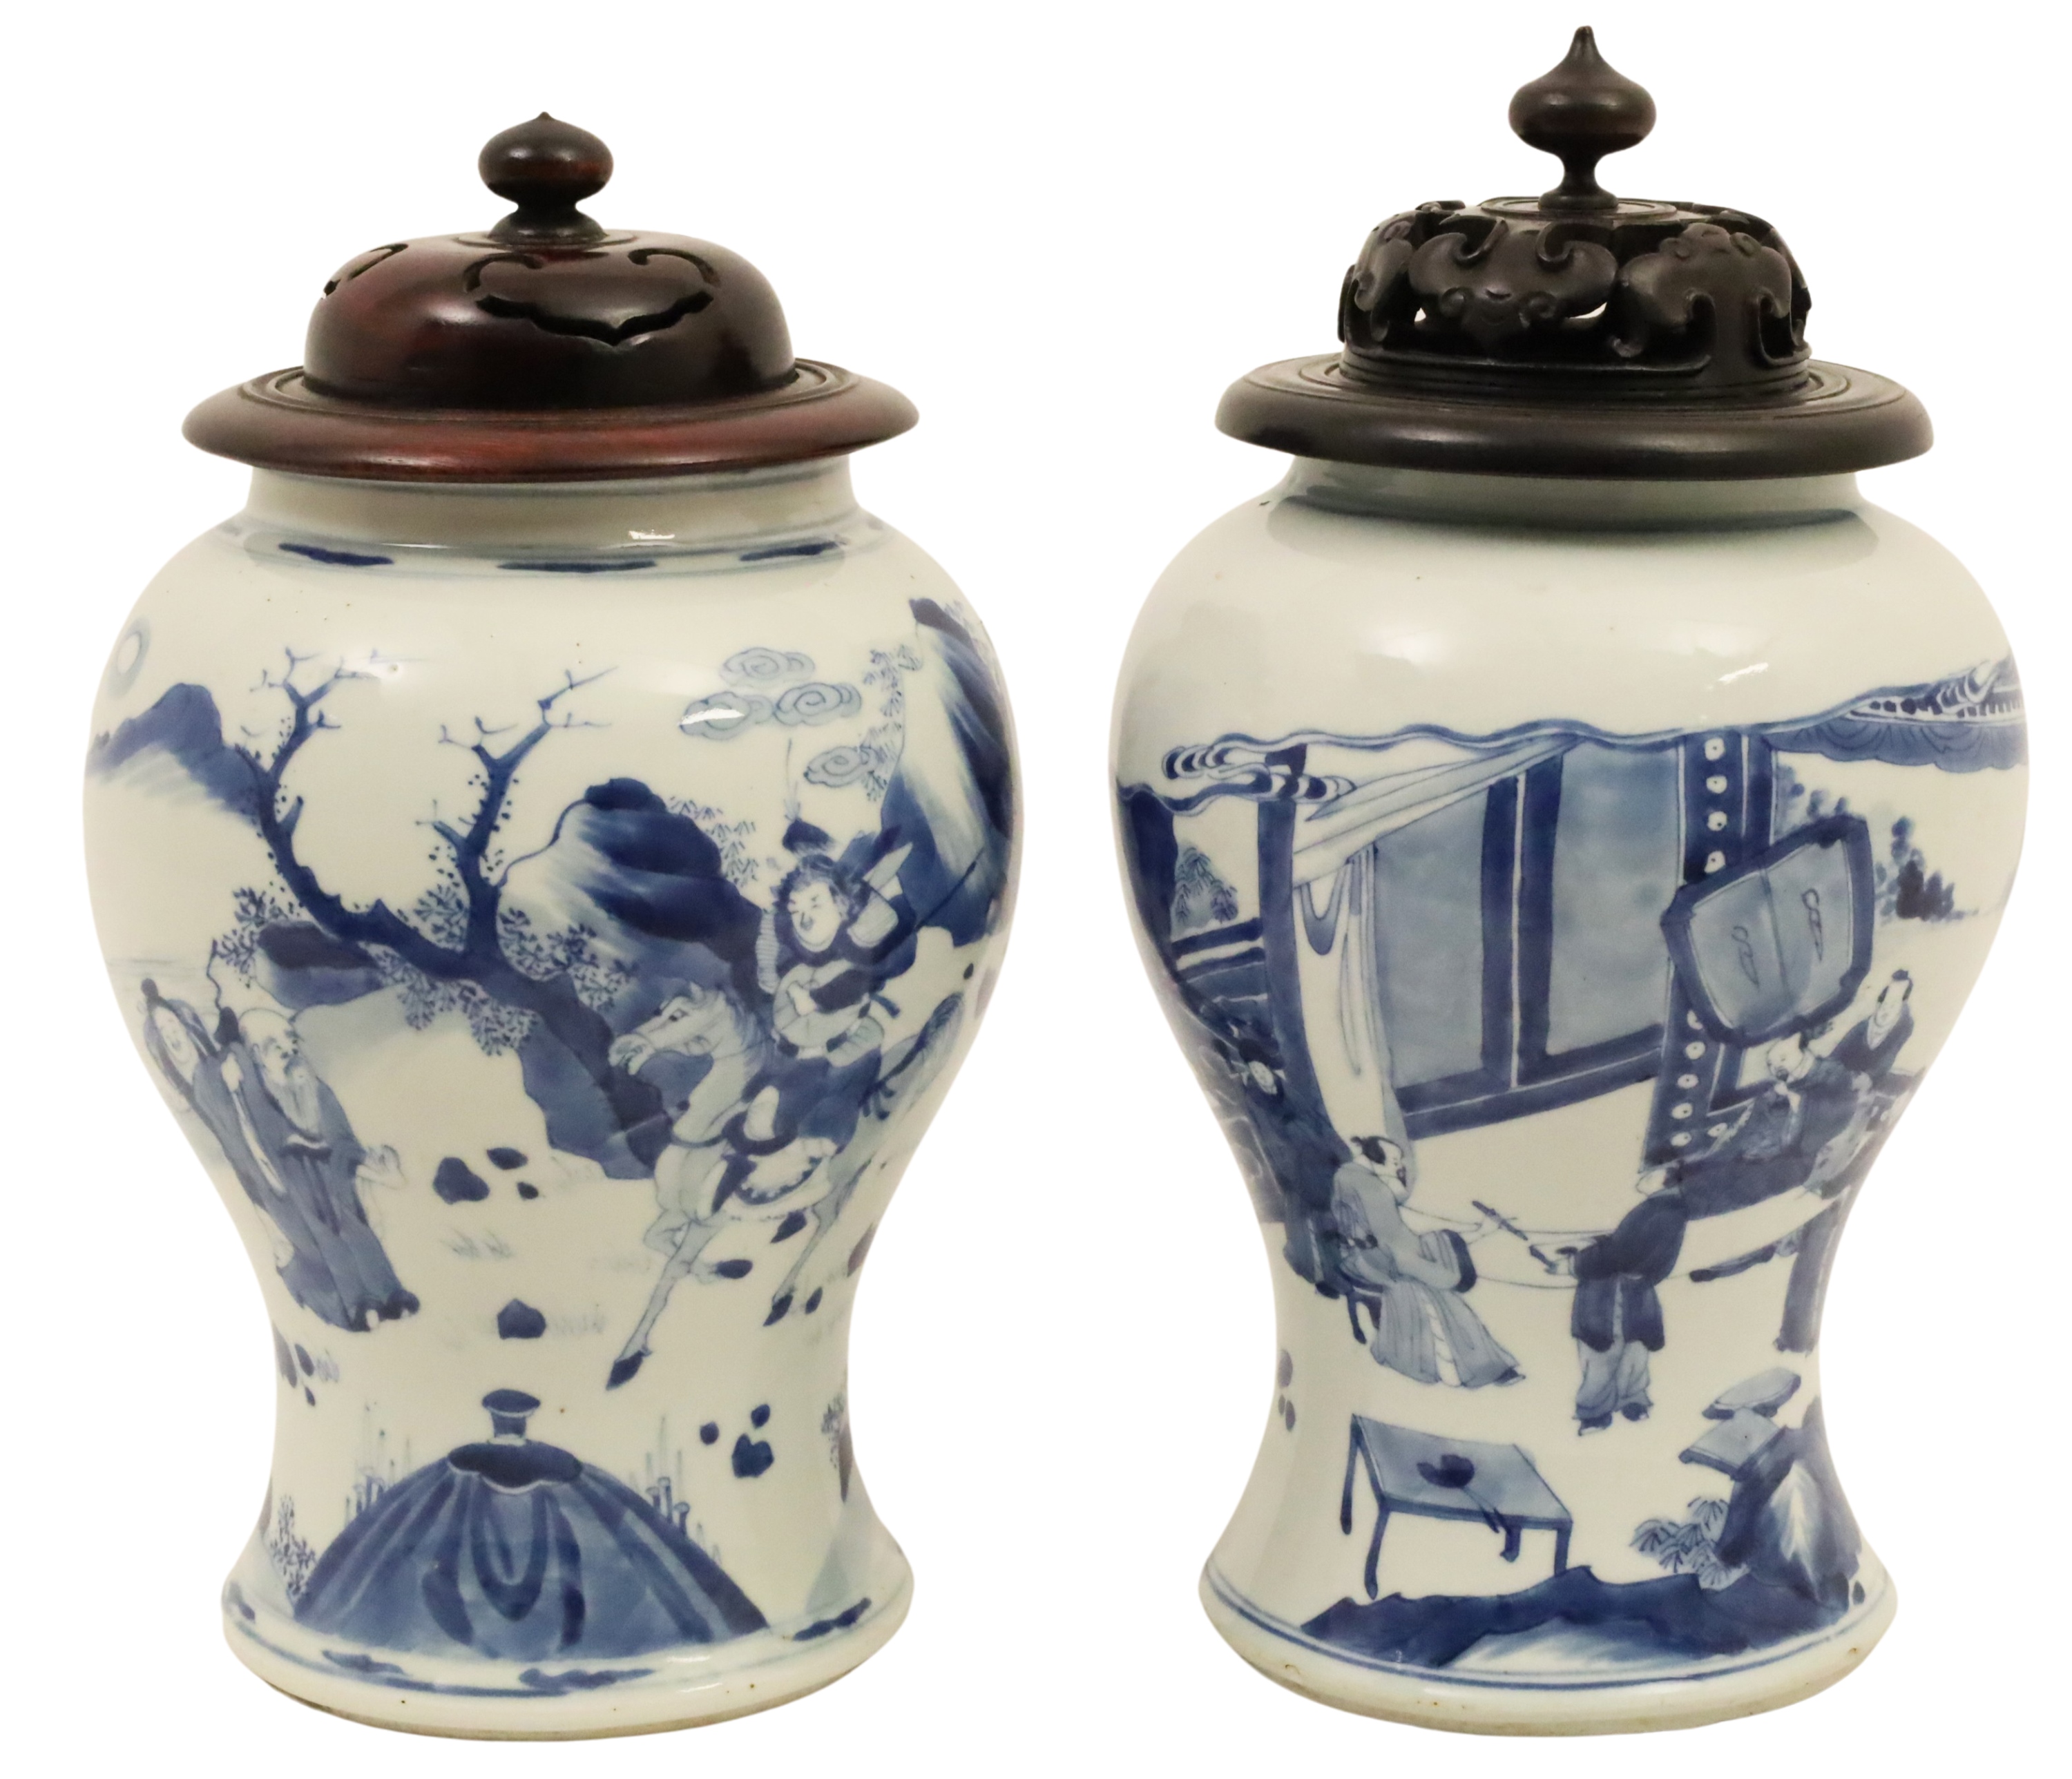 PAIR OF KANGXI PERIOD BLUE AND